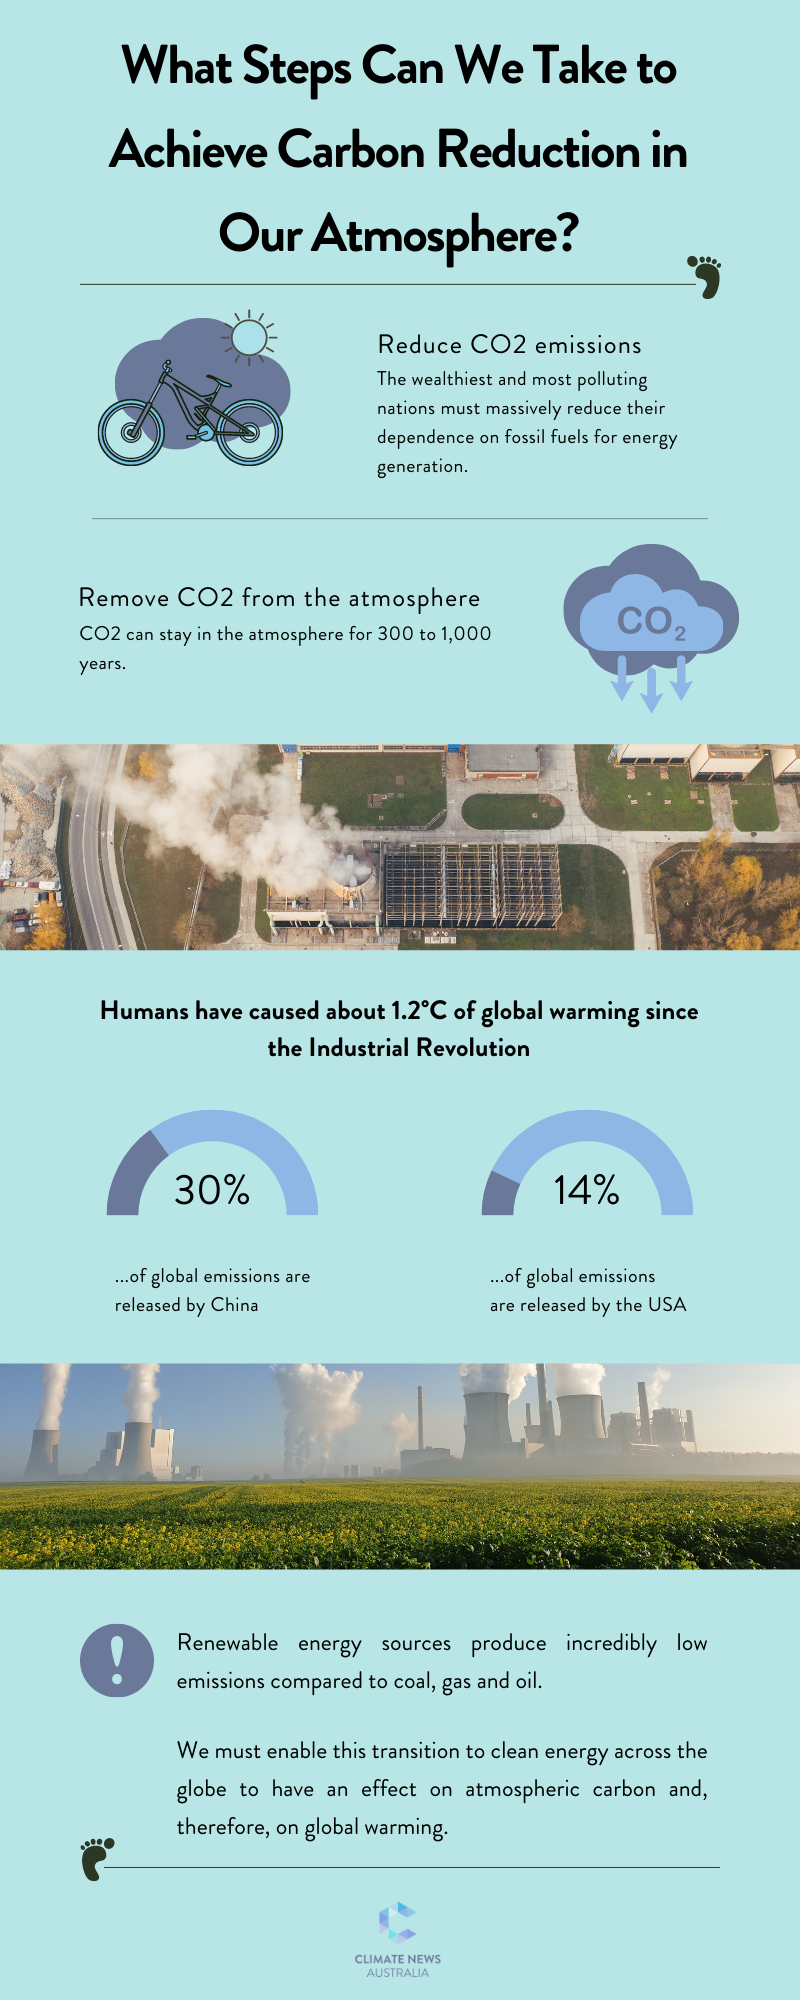 Infographic about what steps we can take to achieve carbon reduction in our atmosphere